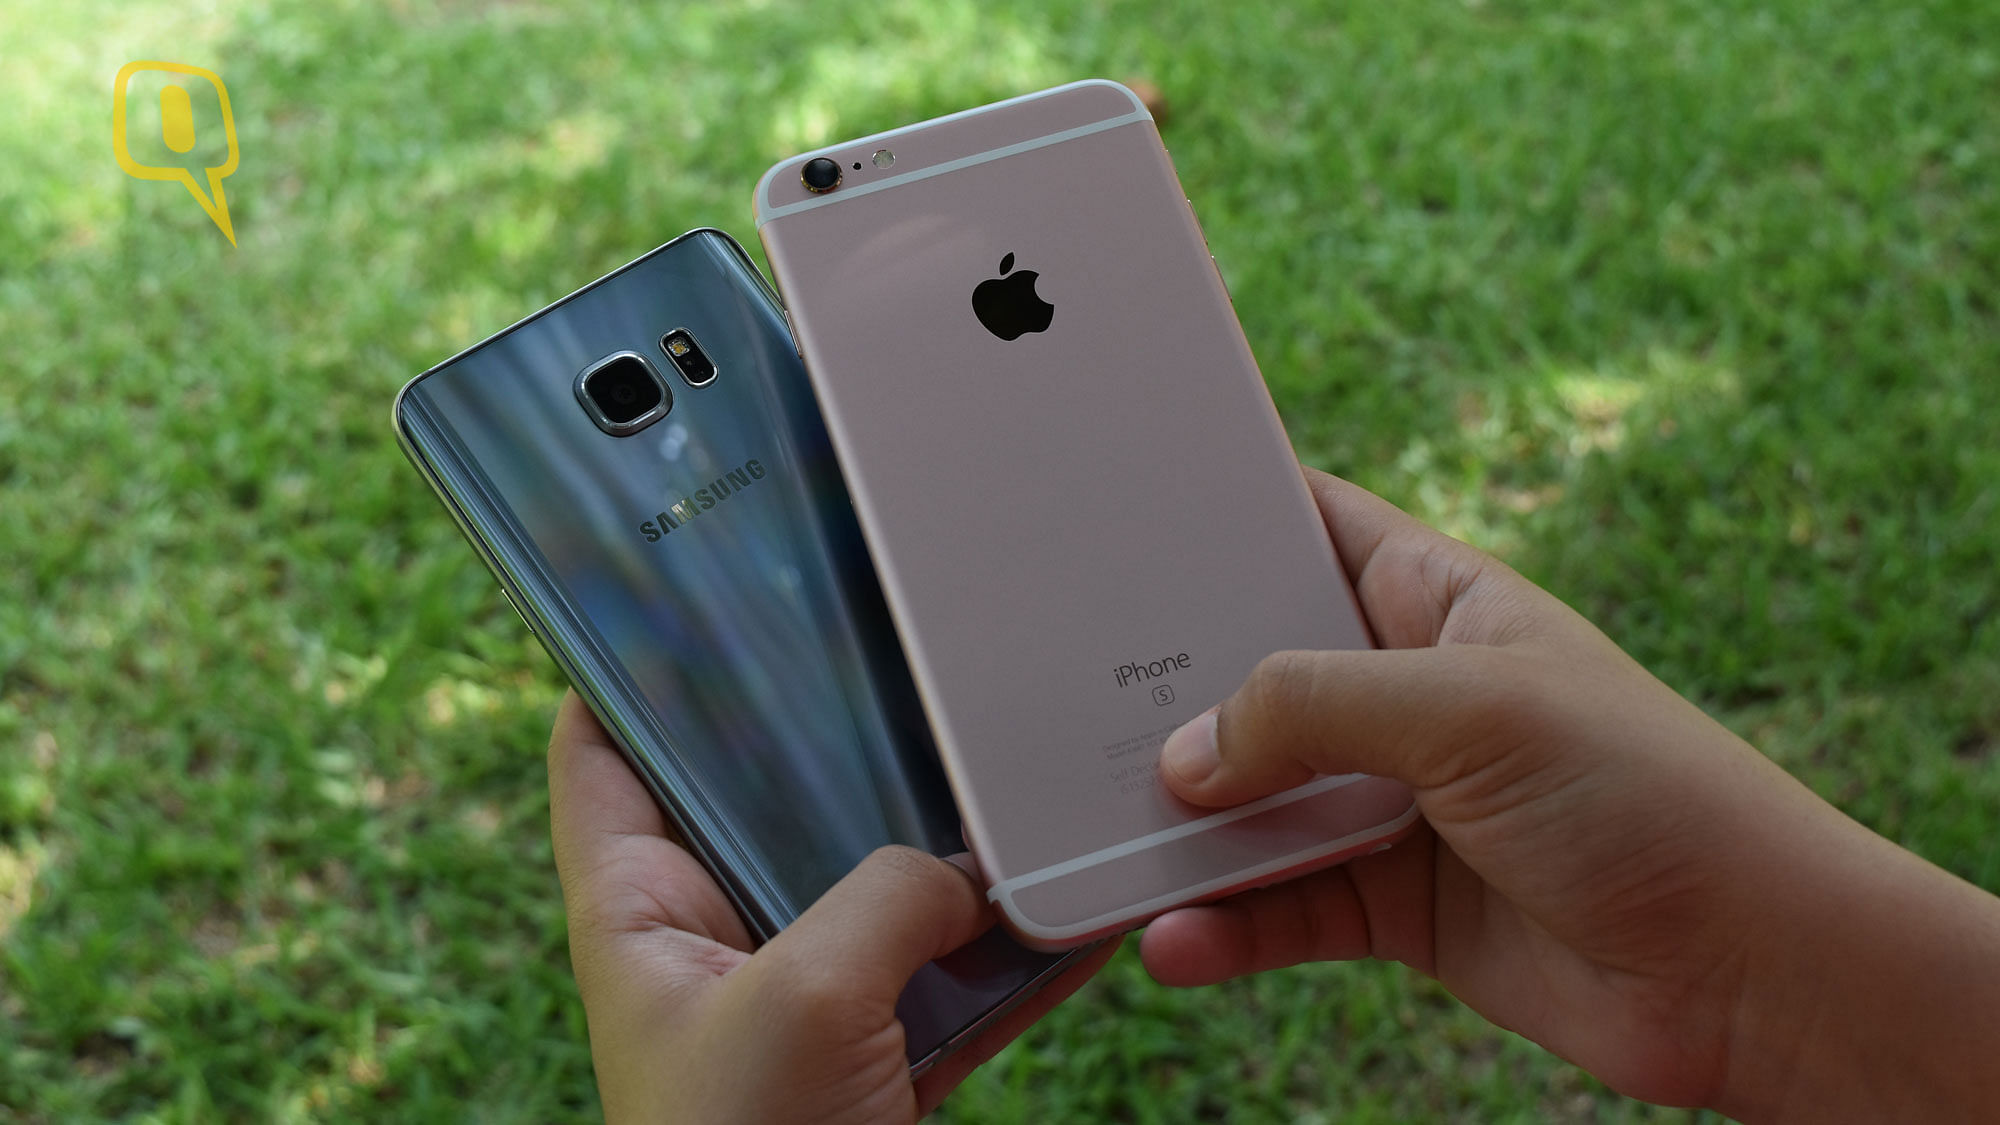 (Left) Samsung Galaxy Note 5 and (right) Apple iPhone 6s Plus. (Photo: <b>The Quint</b>)